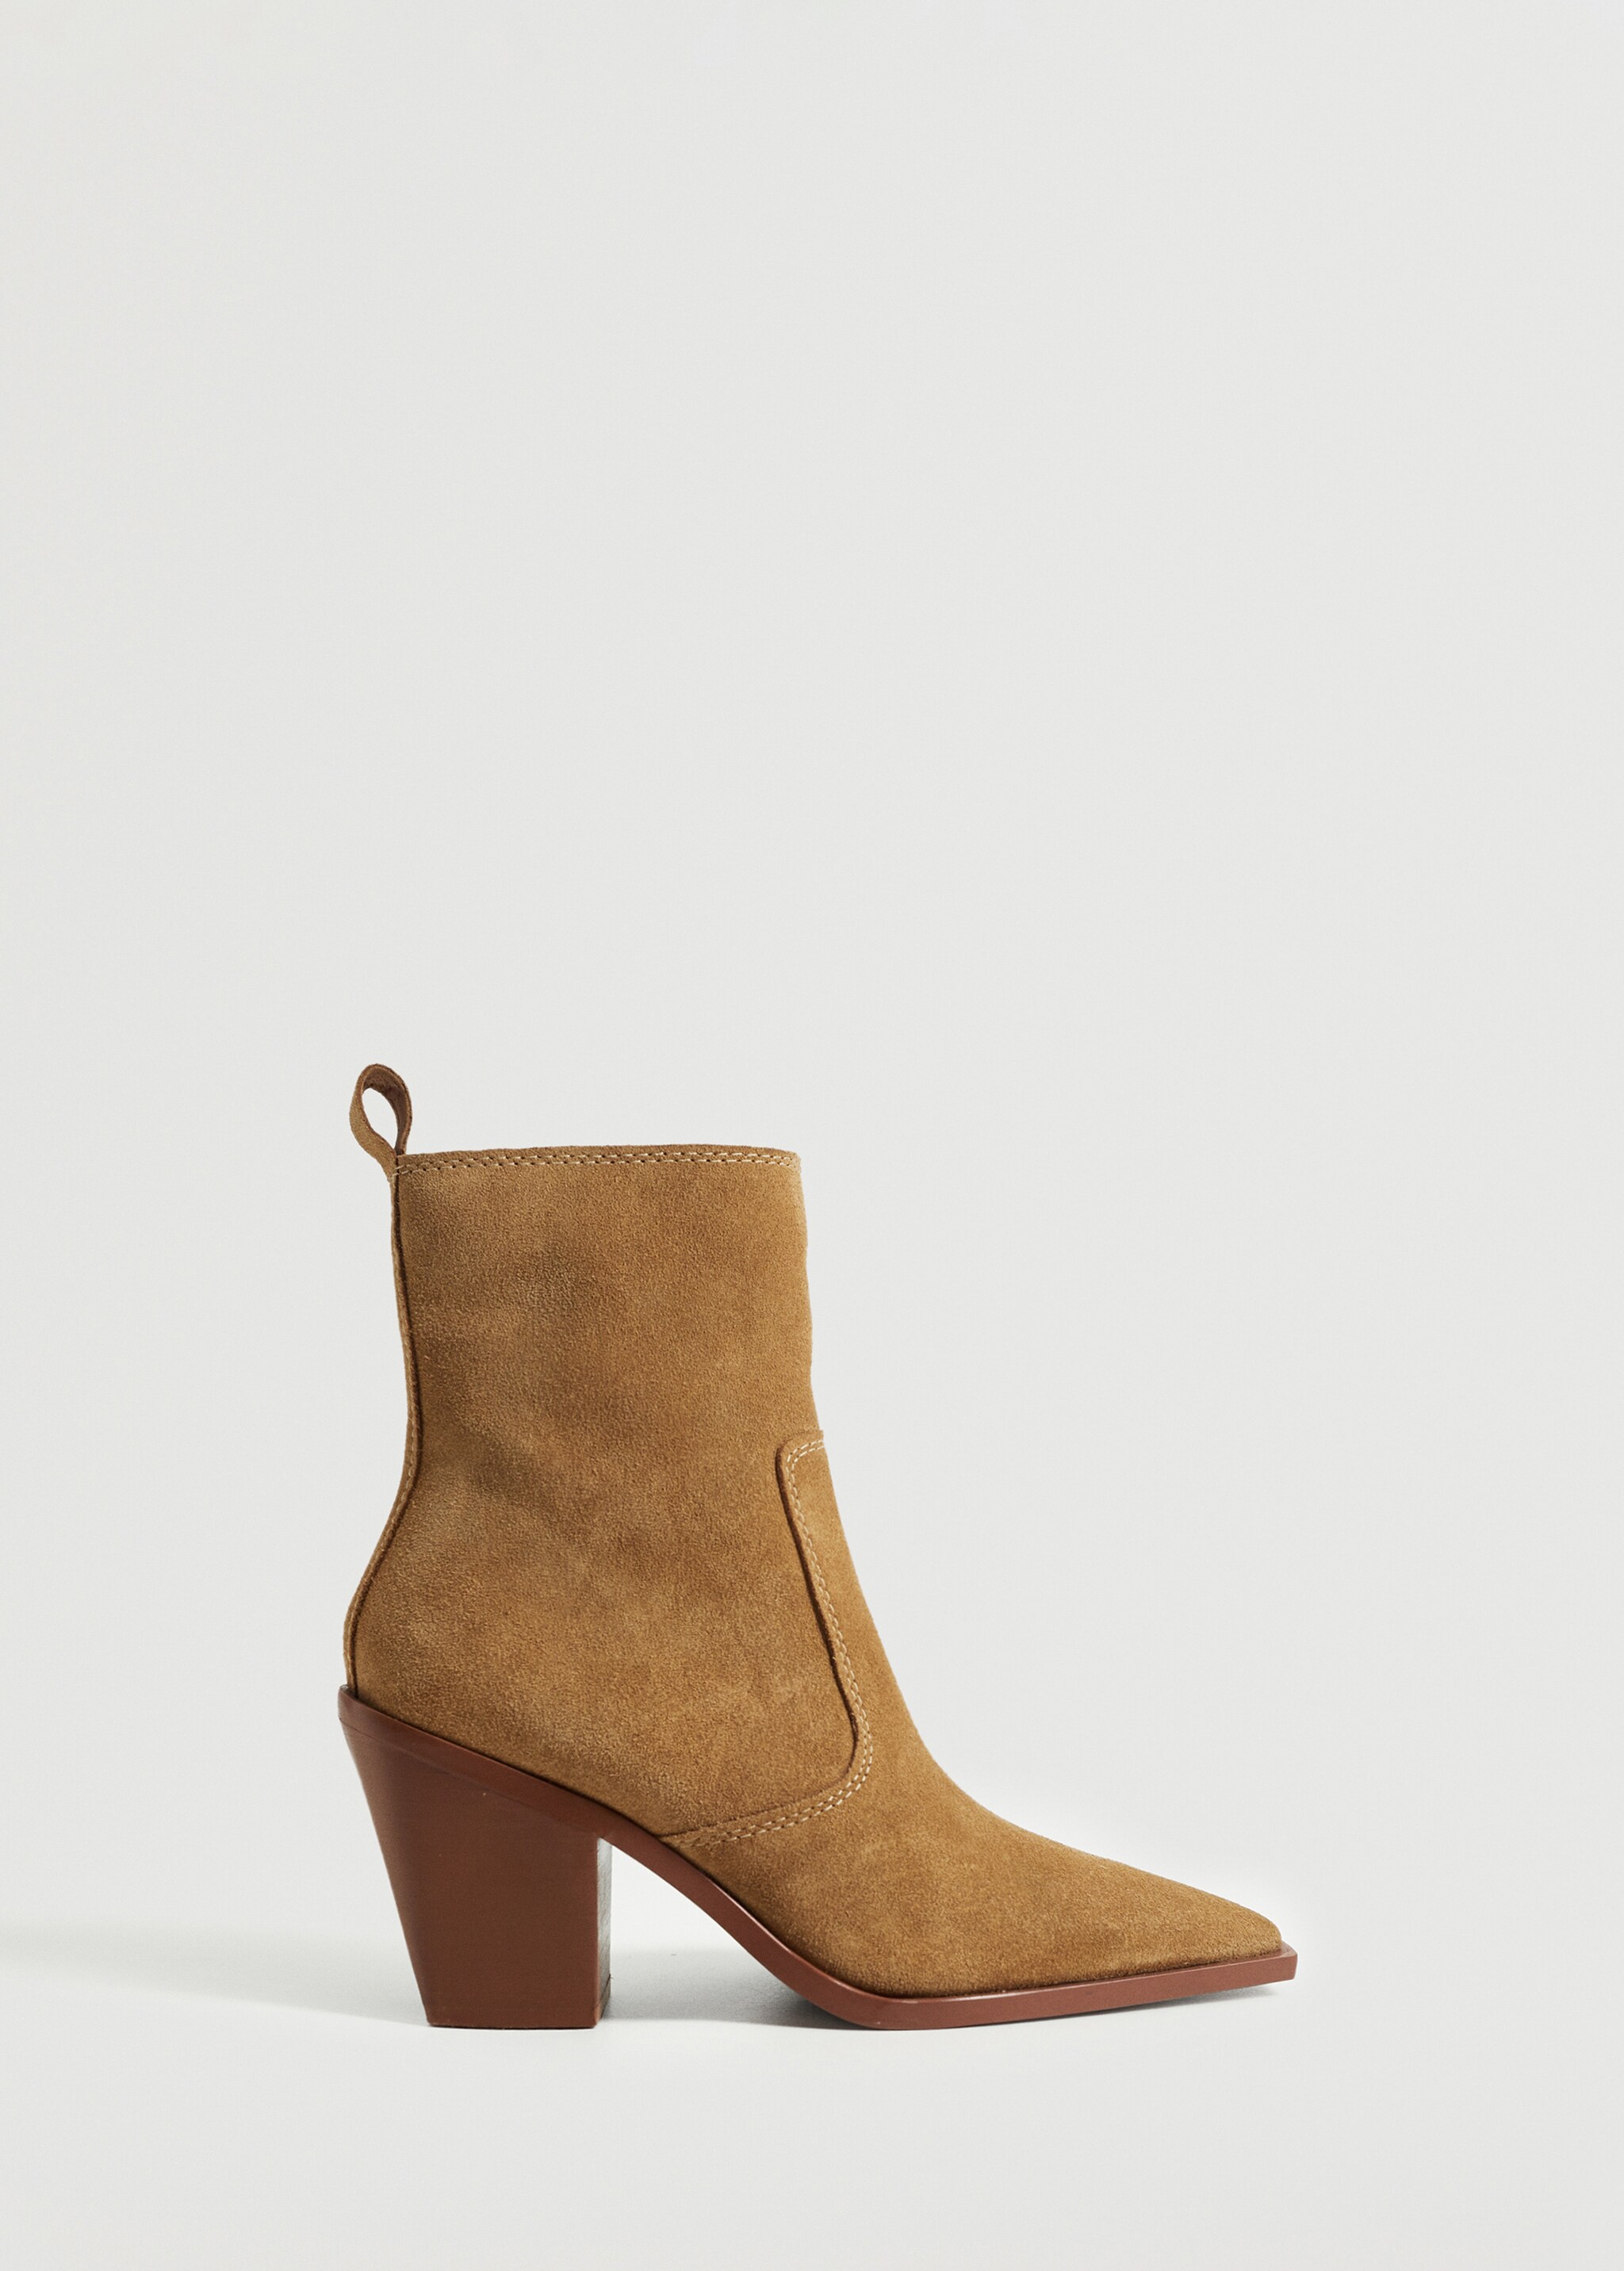 Heel leather ankle boot - Article without model